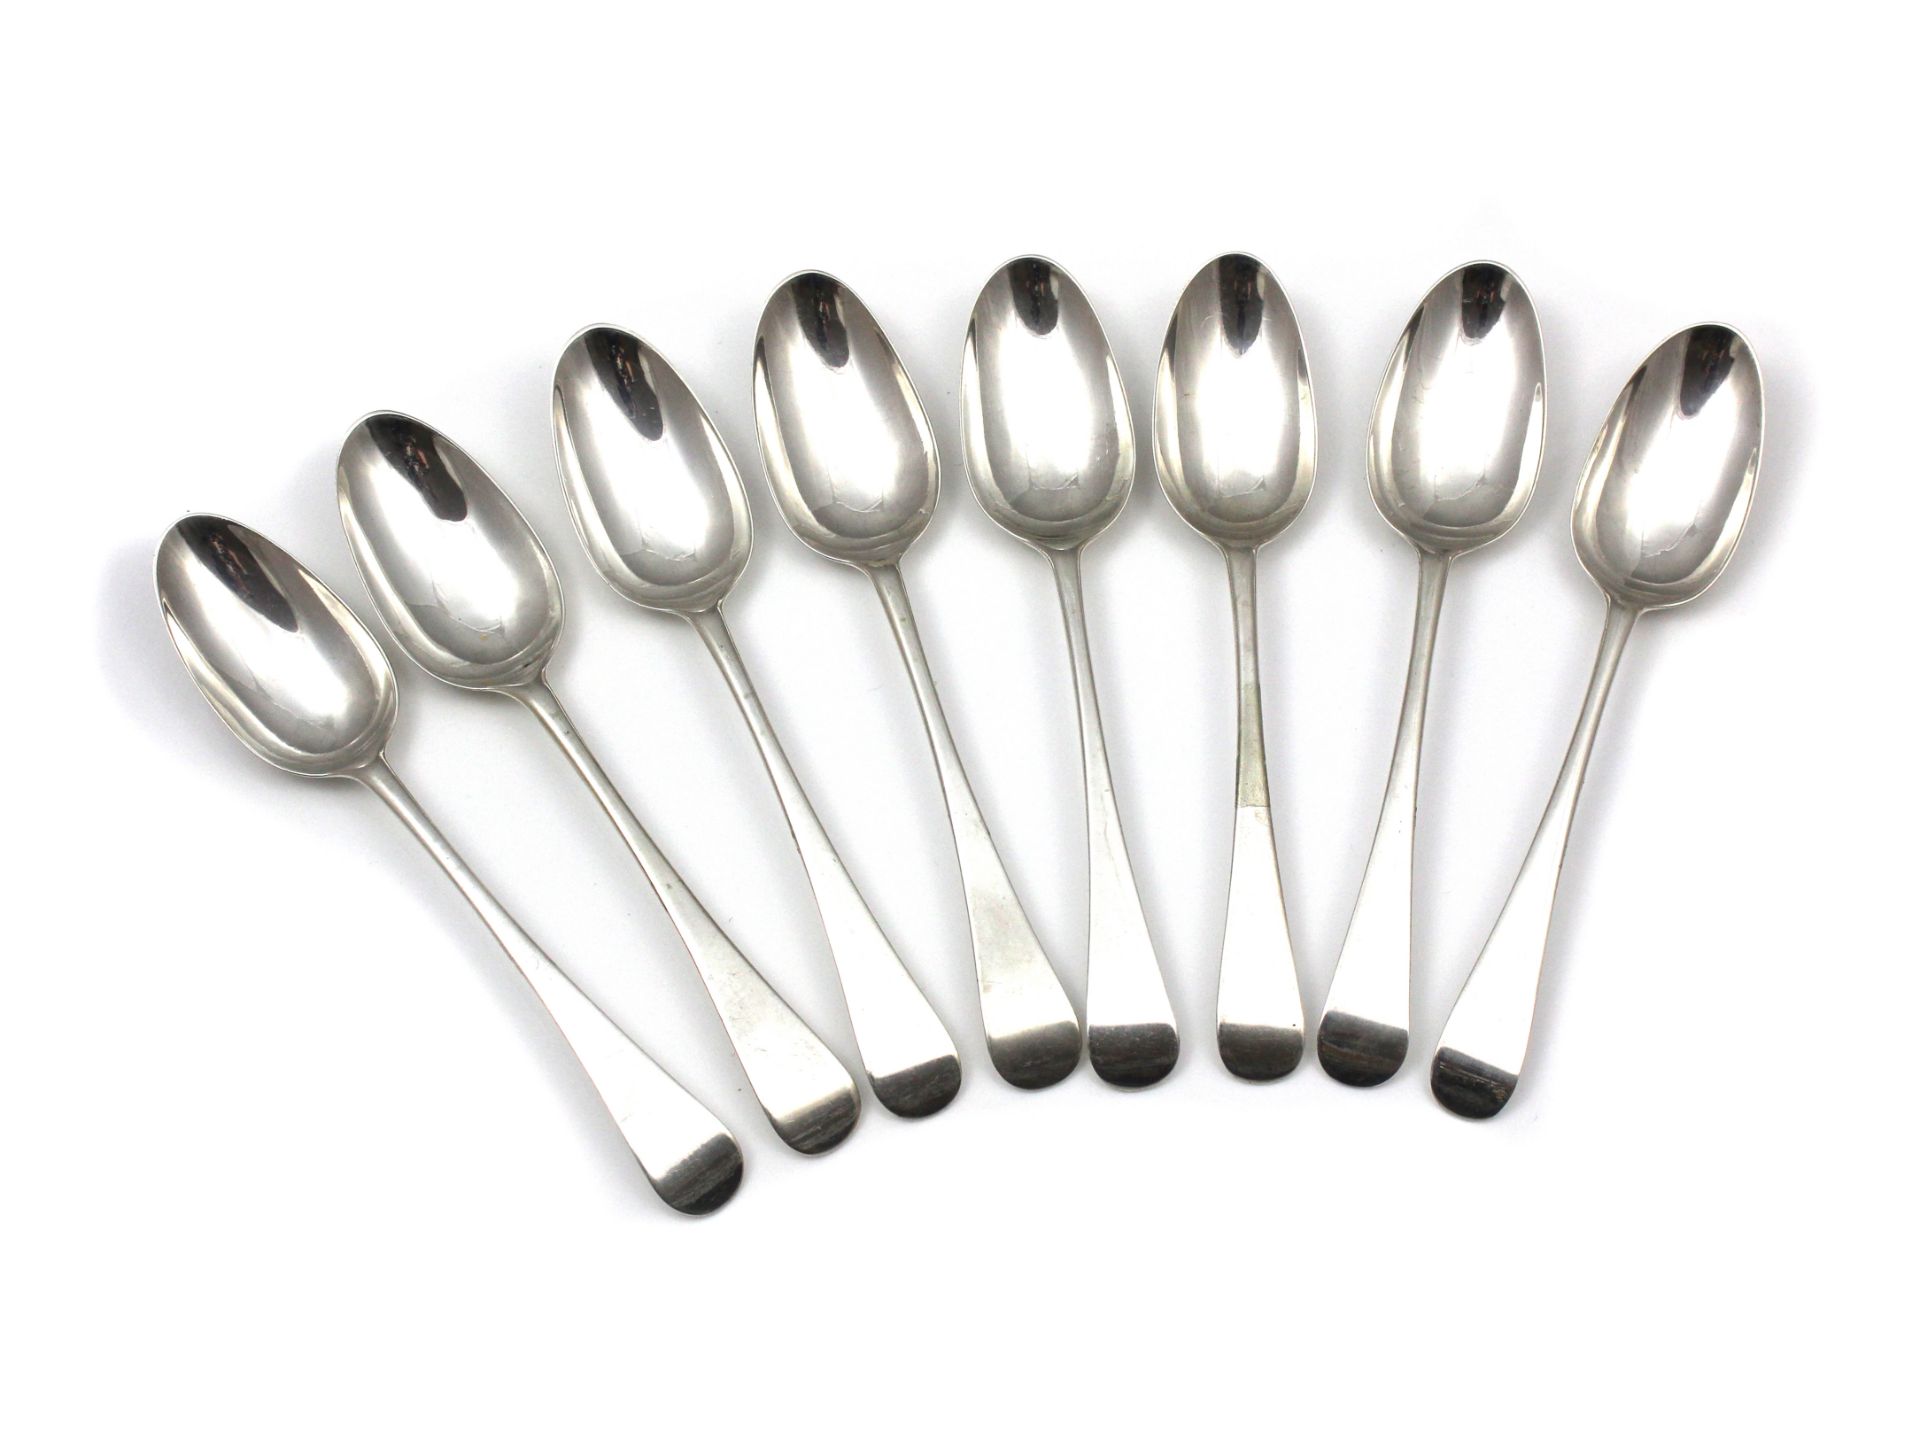 A set of eight antique George III Sterling Silver dessert spoons maker's mark S J, London 1767. In